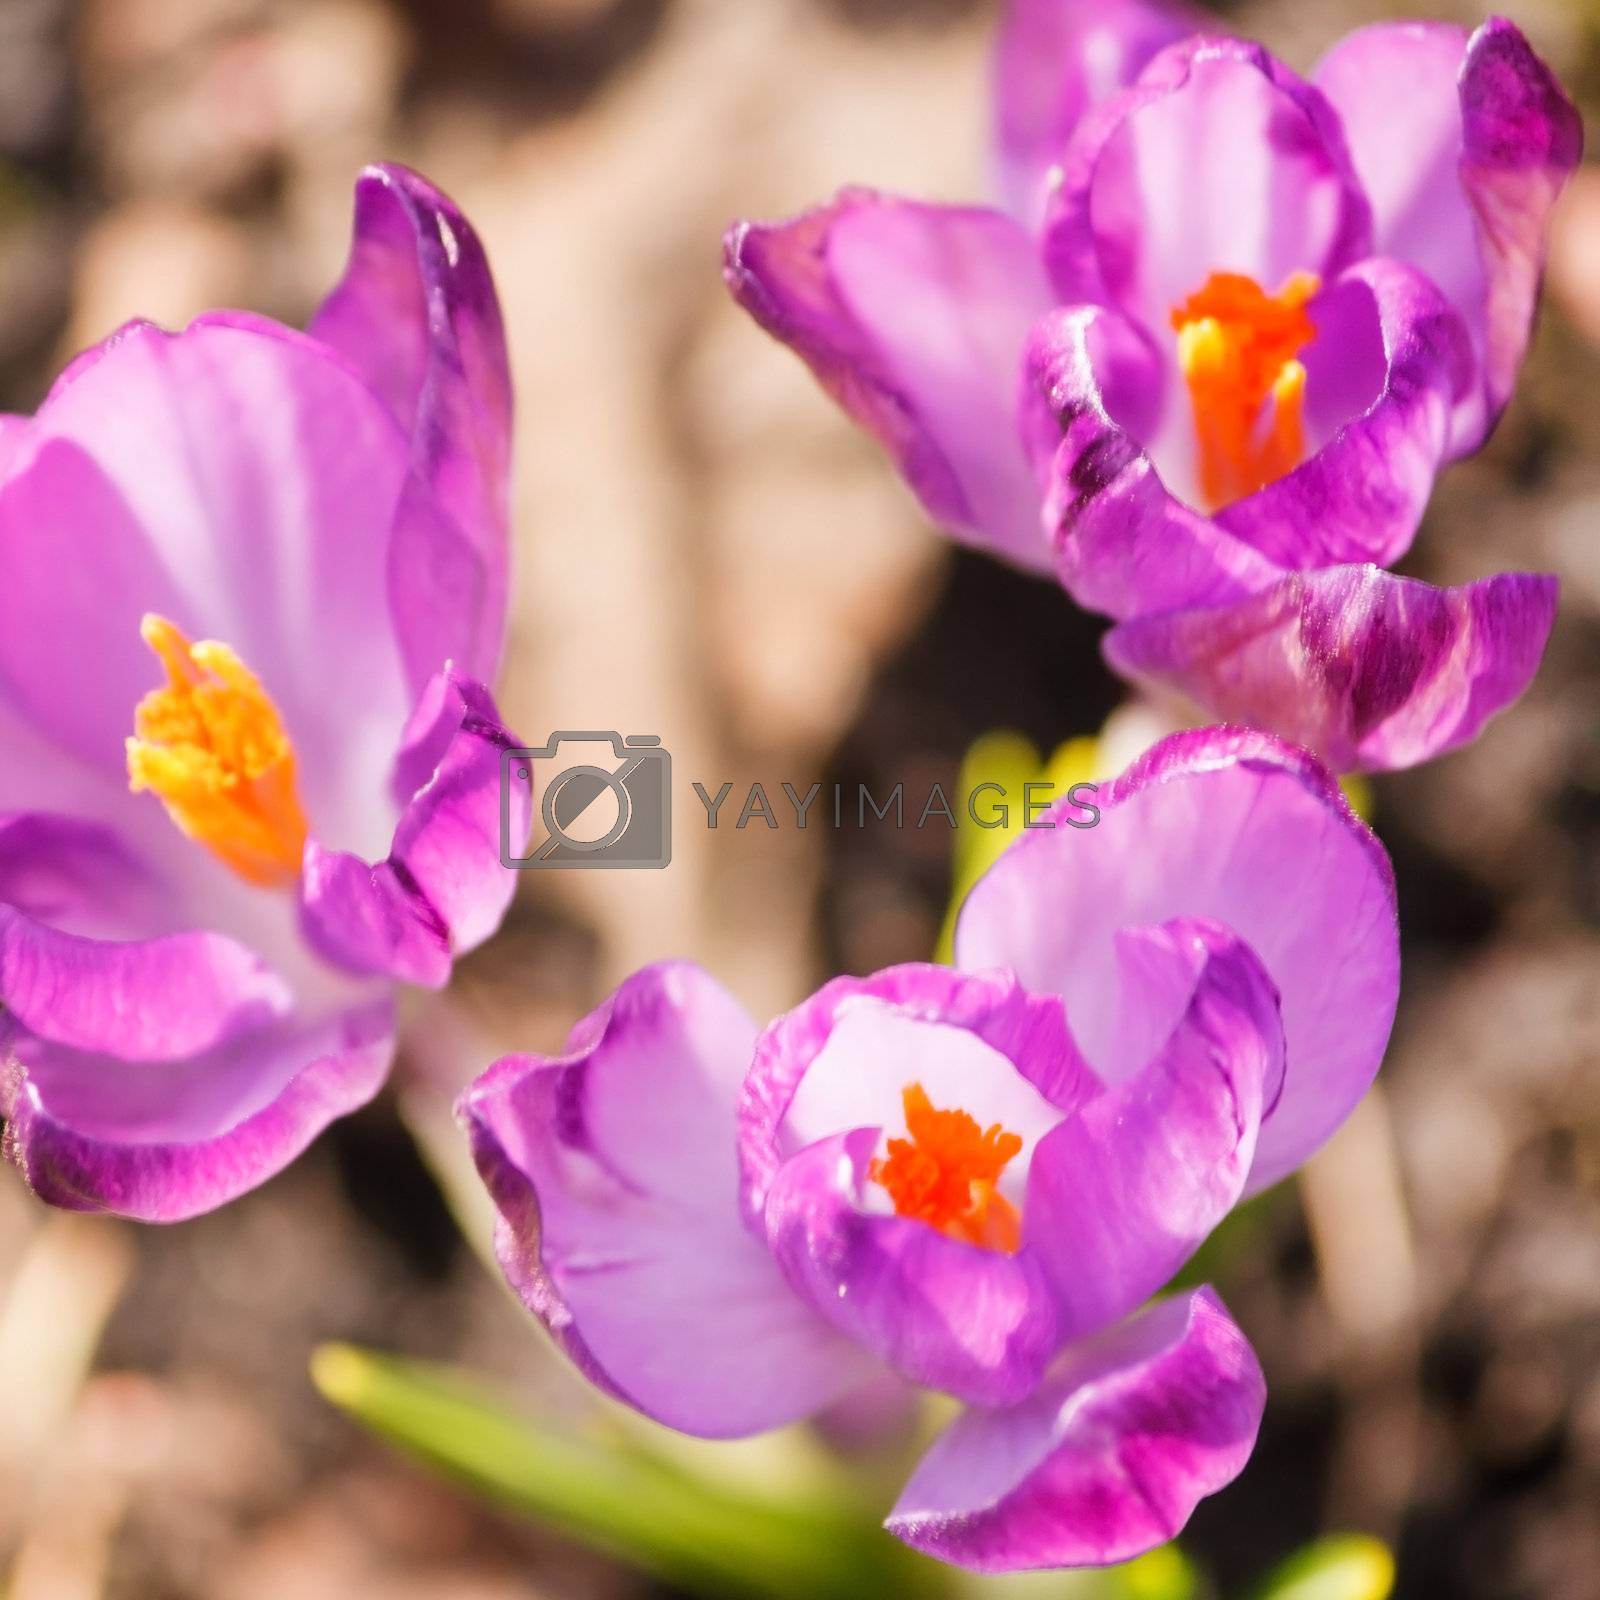 Royalty free image of spring flowers by shebeko